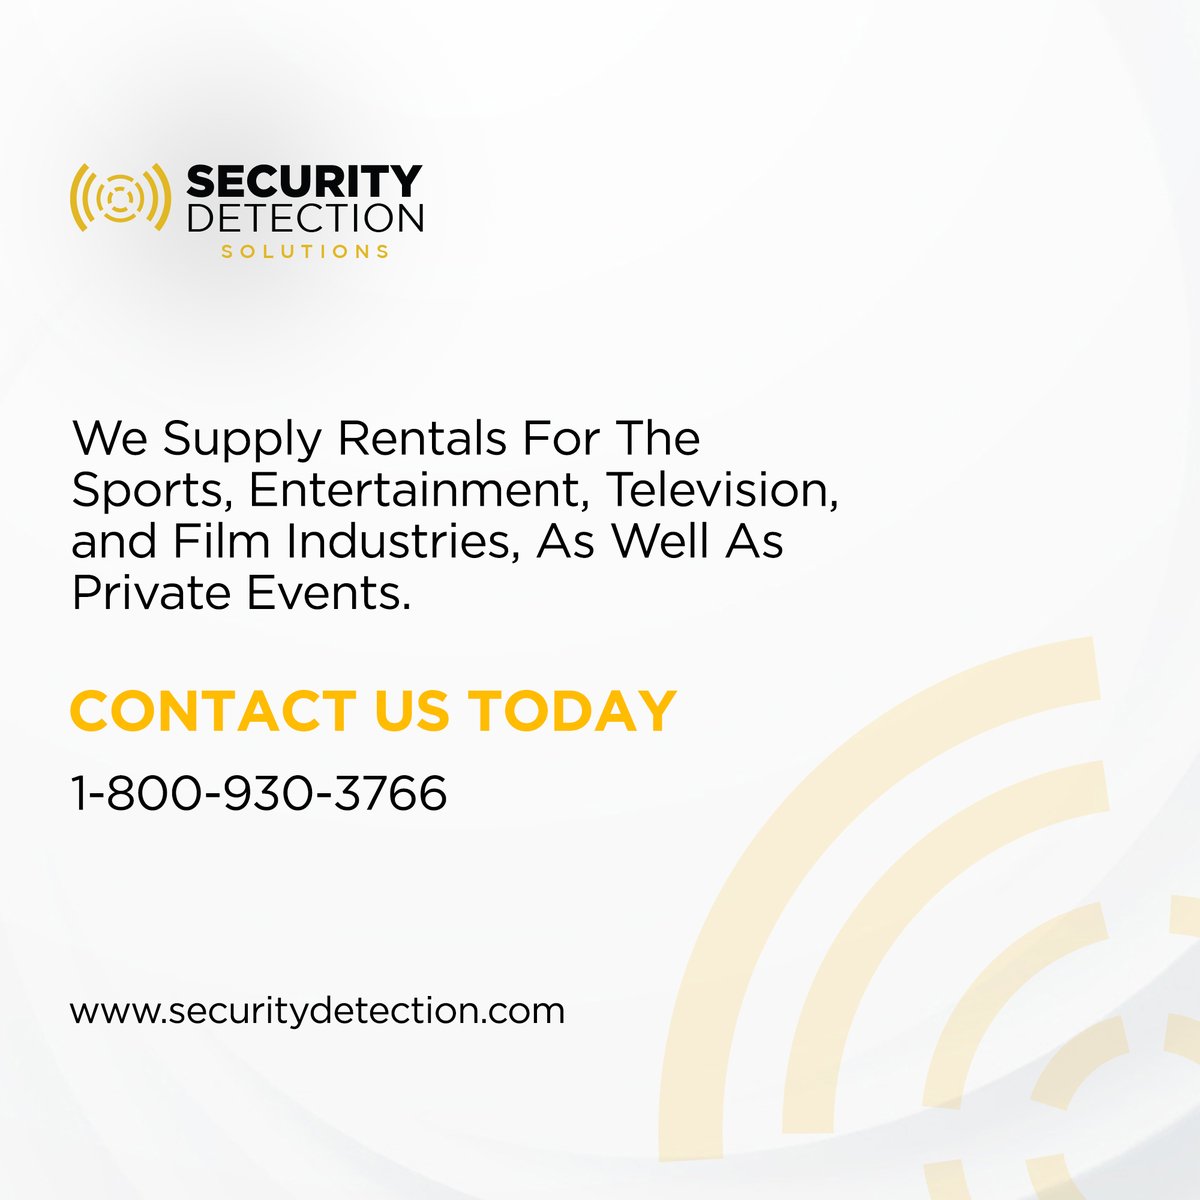 Check out our metal detector rentals and x-ray scanner rentals for your facility or events. Invest in them for bolstered security and safety and keep a check on what goes on in your space. 

#Securitydetection #securityequipment #industryleadingsecurity #nationwide